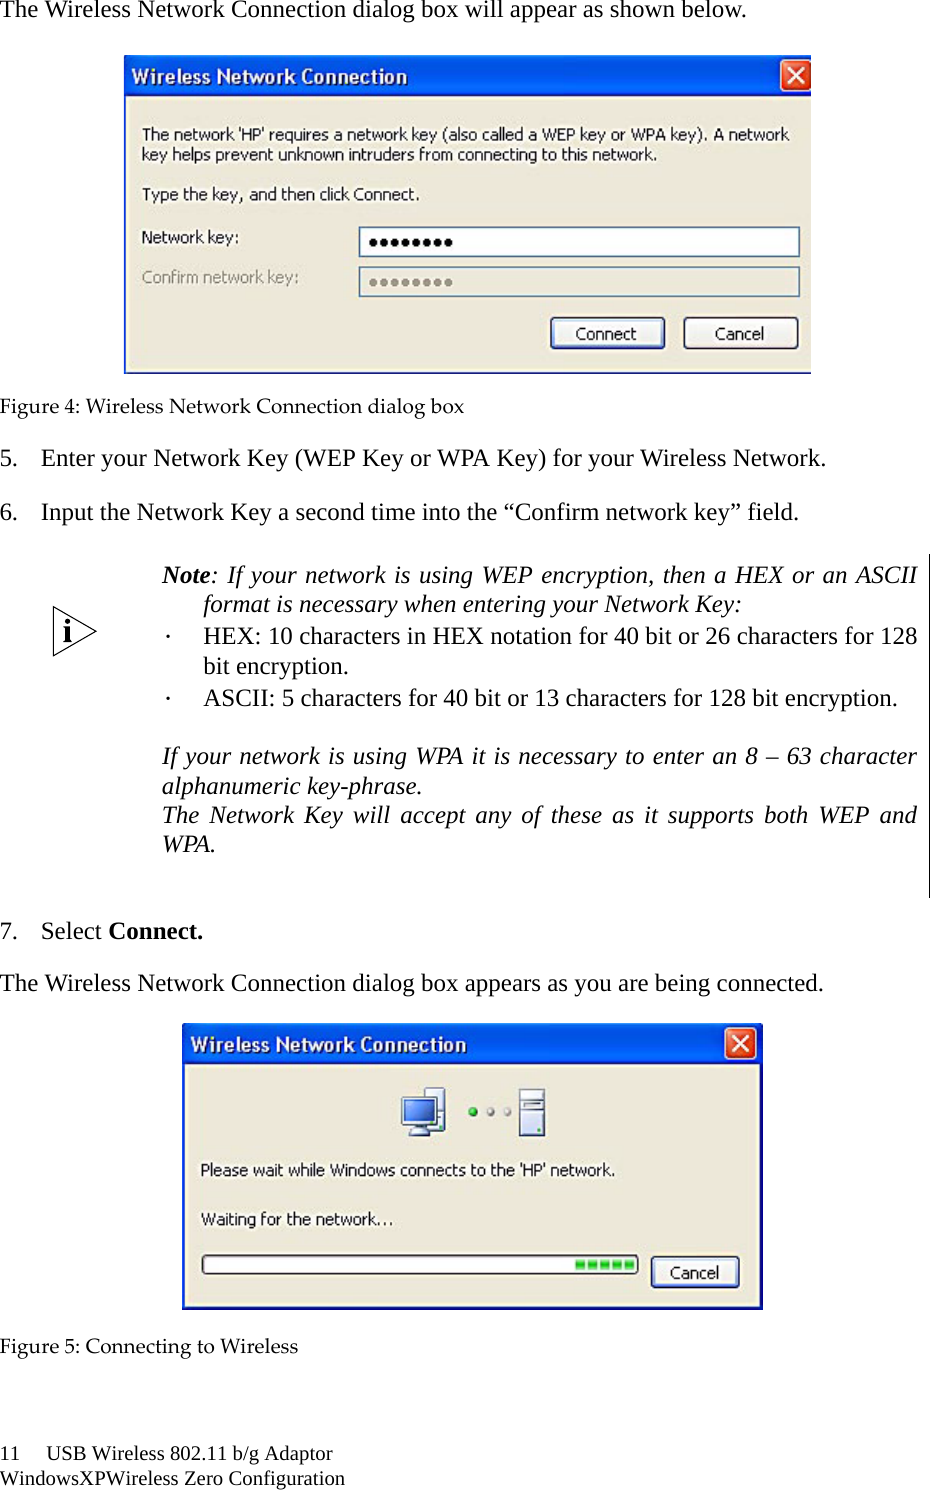 11     USB Wireless 802.11 b/g AdaptorWindowsXPWireless Zero ConfigurationThe Wireless Network Connection dialog box will appear as shown below.Figure4:WirelessNetworkConnectiondialogbox5. Enter your Network Key (WEP Key or WPA Key) for your Wireless Network.6. Input the Network Key a second time into the “Confirm network key” field.7. Select Connect.The Wireless Network Connection dialog box appears as you are being connected.Figure5:ConnectingtoWirelessNote: If your network is using WEP encryption, then a HEX or an ASCIIformat is necessary when entering your Network Key:．HEX: 10 characters in HEX notation for 40 bit or 26 characters for 128bit encryption.．ASCII: 5 characters for 40 bit or 13 characters for 128 bit encryption.If your network is using WPA it is necessary to enter an 8 – 63 characteralphanumeric key-phrase.The Network Key will accept any of these as it supports both WEP andWPA.